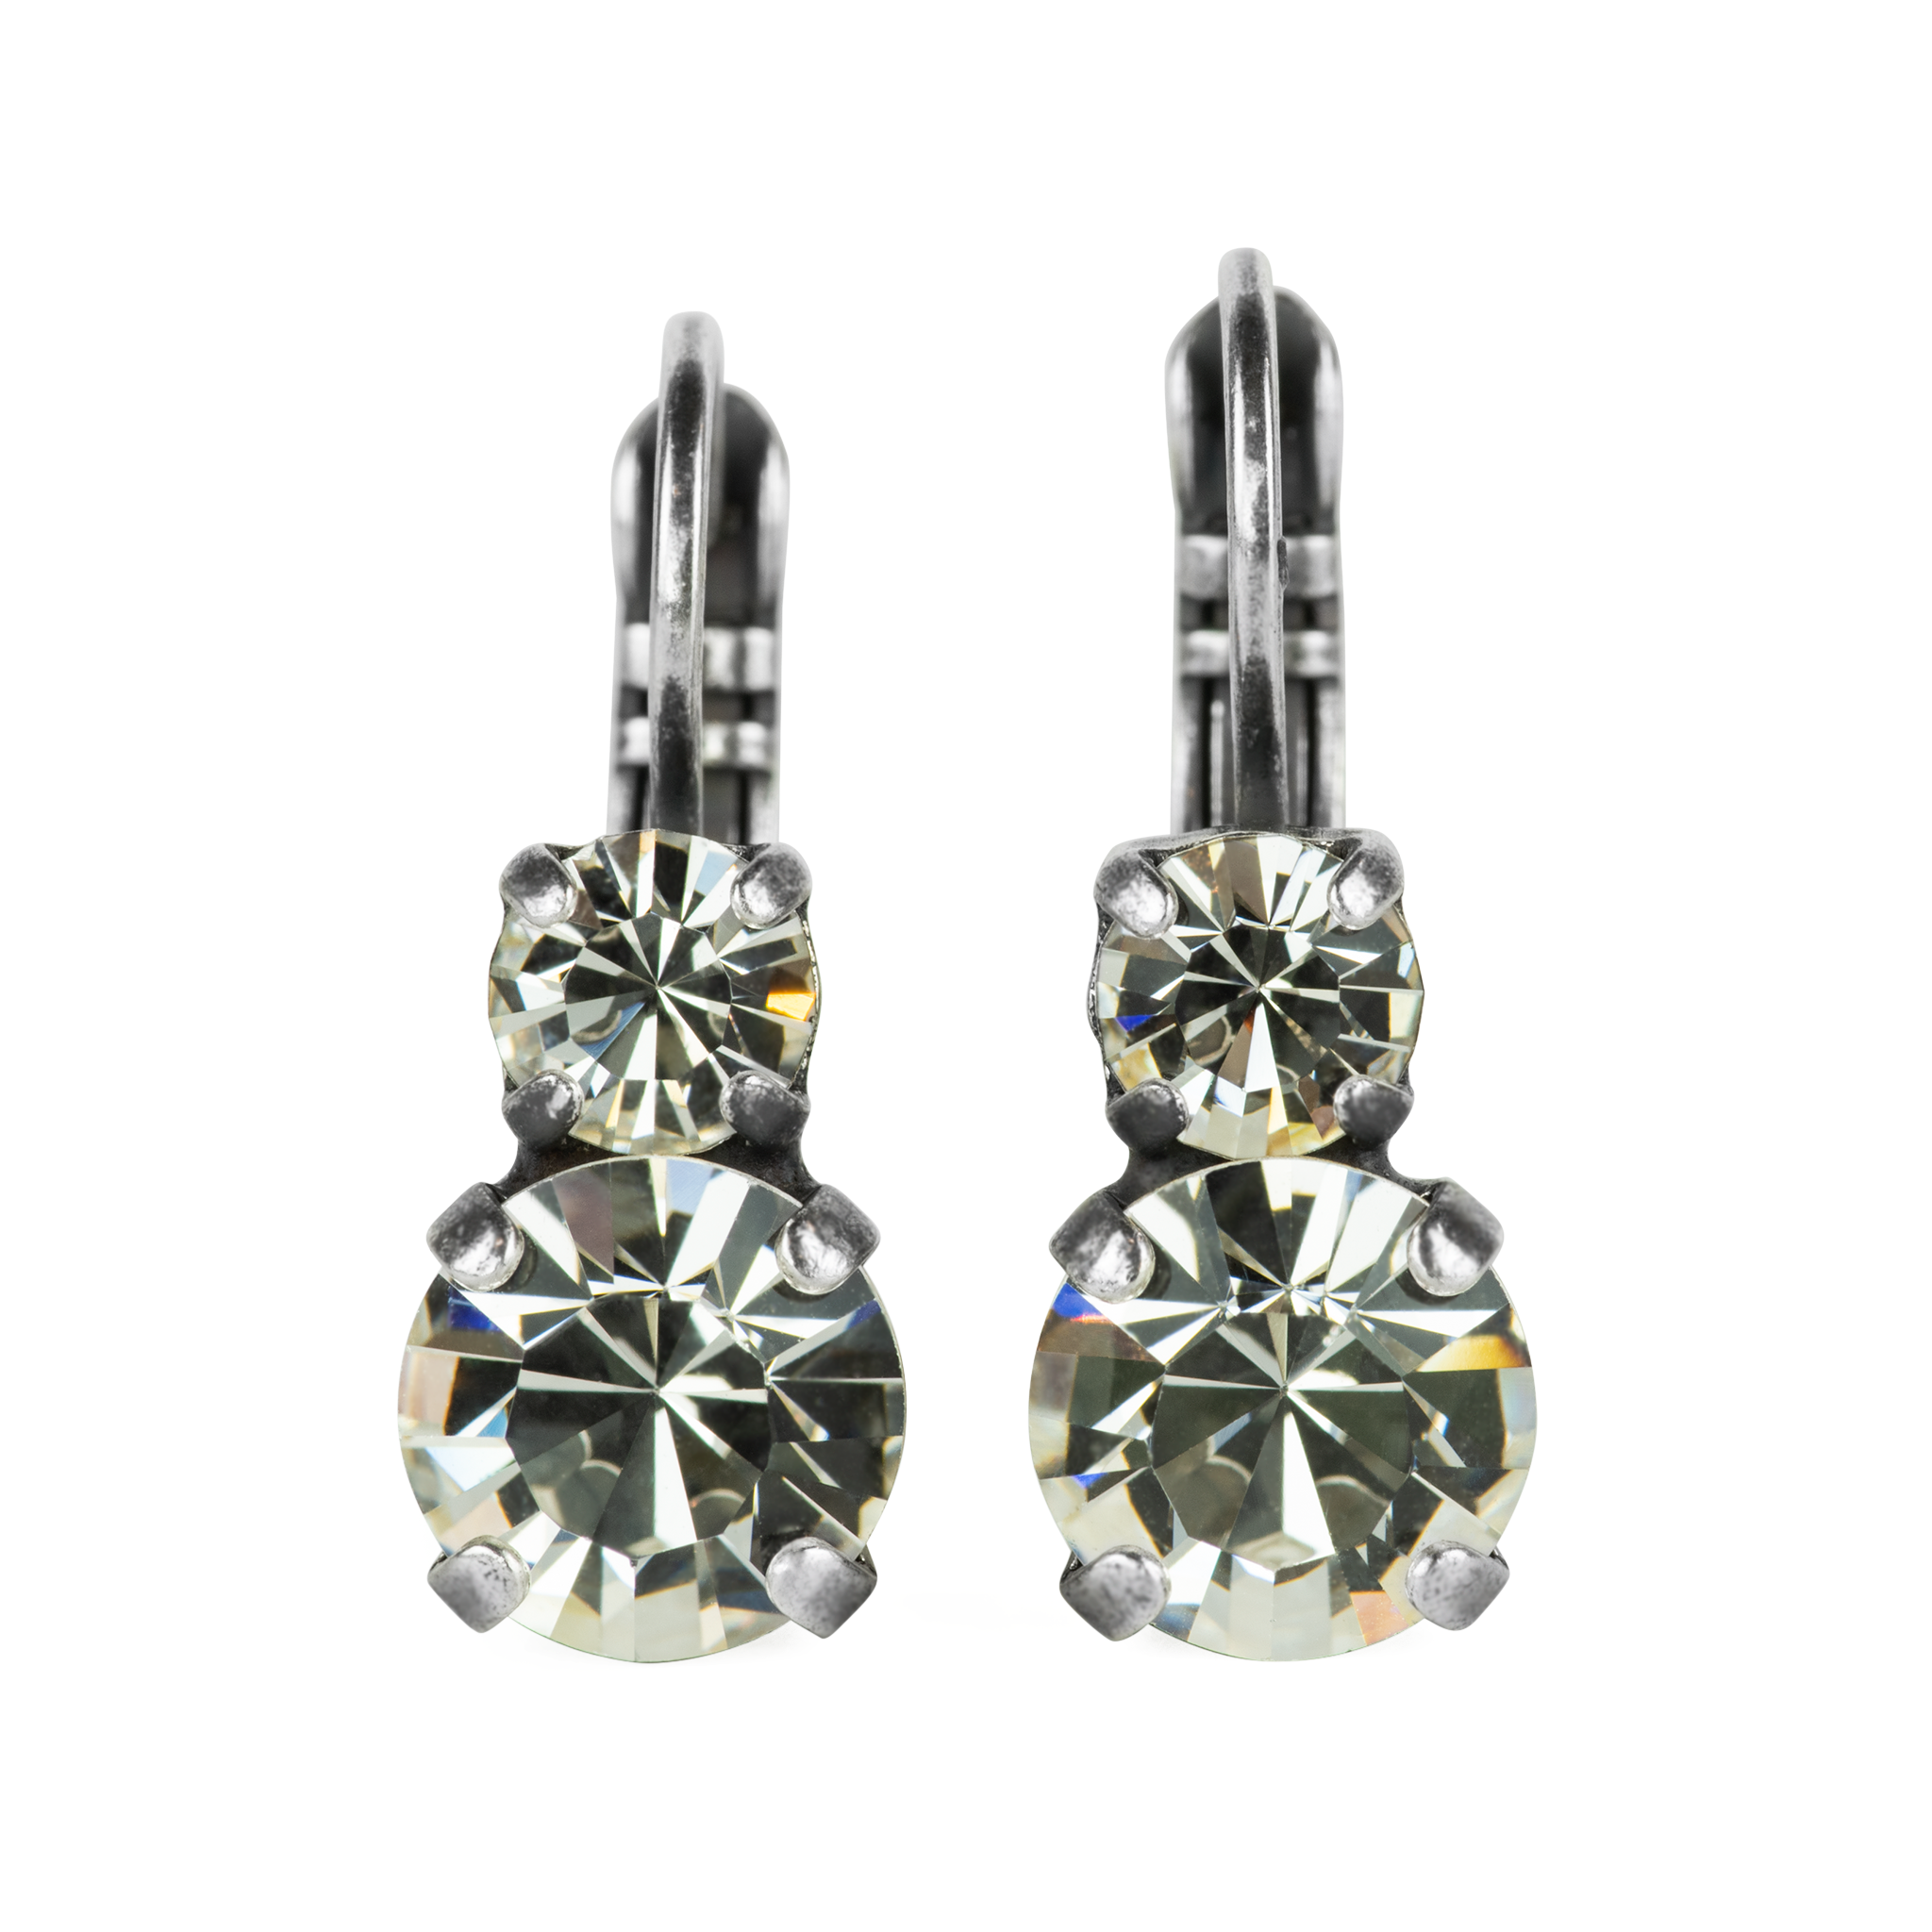 Mariana Silver Must-Have Double Stone Crystal Leverback Earrings in “On A Clear Day"